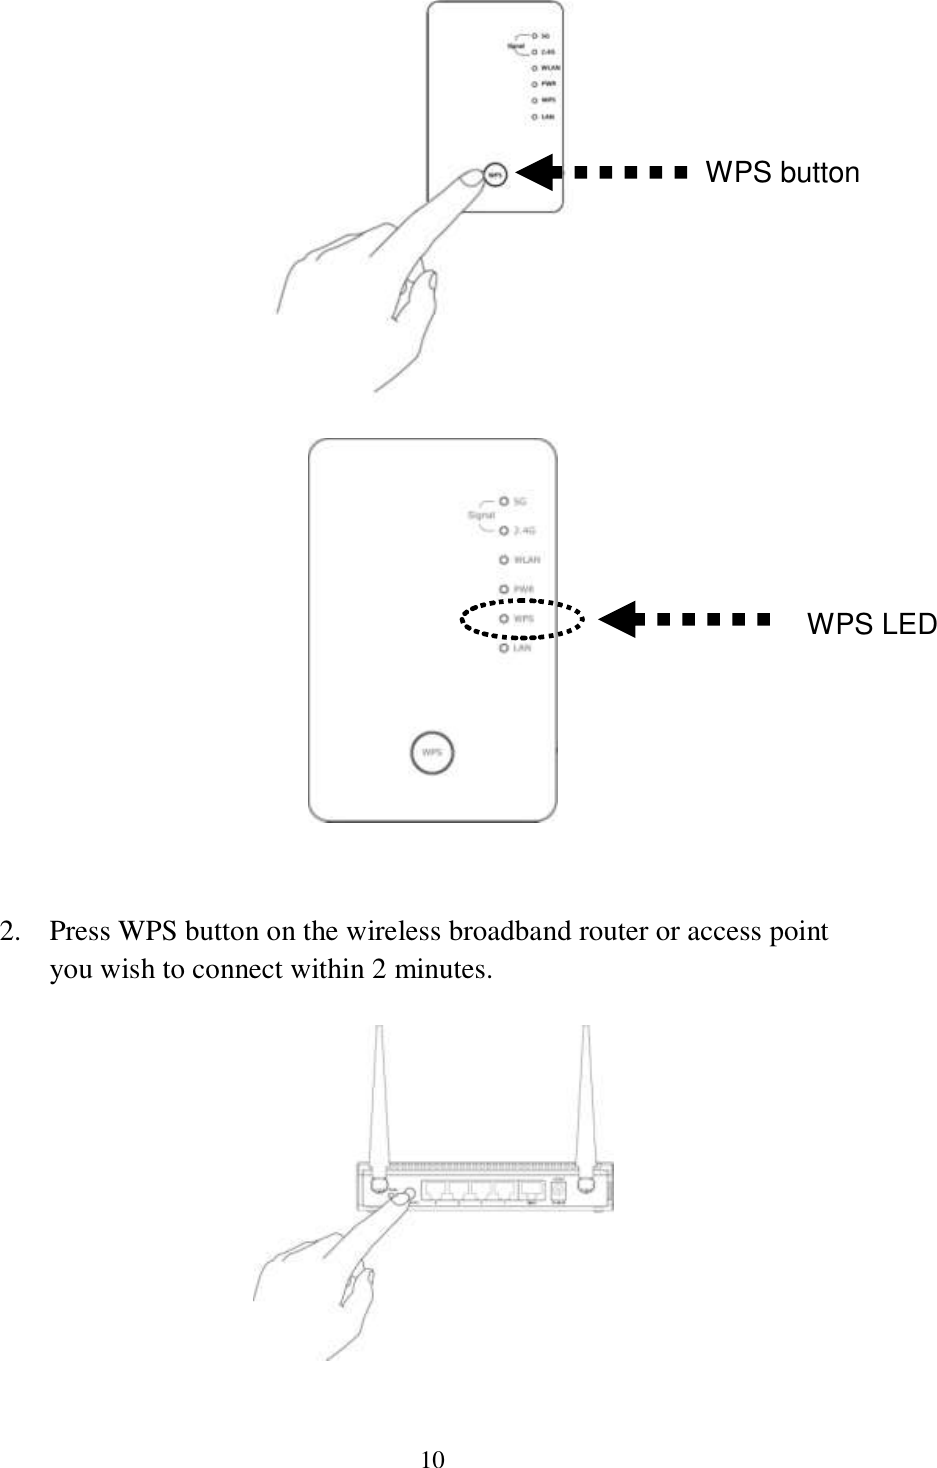 10     2. Press WPS button on the wireless broadband router or access point you wish to connect within 2 minutes.    WPS LED WPS button 